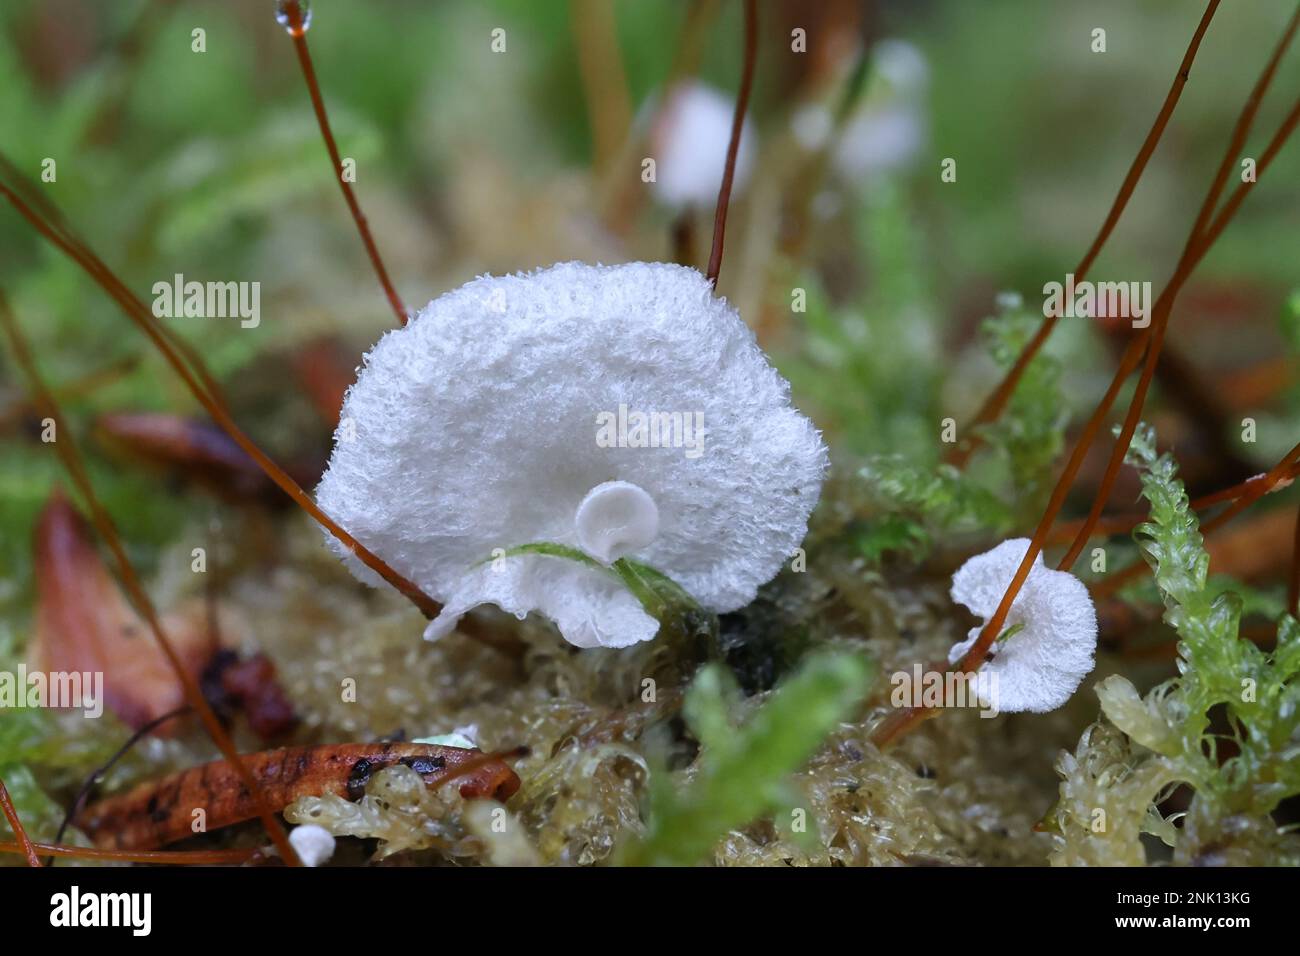 Arrhenia retiruga, known as small moss oysterling, wild fungus from Finland Stock Photo